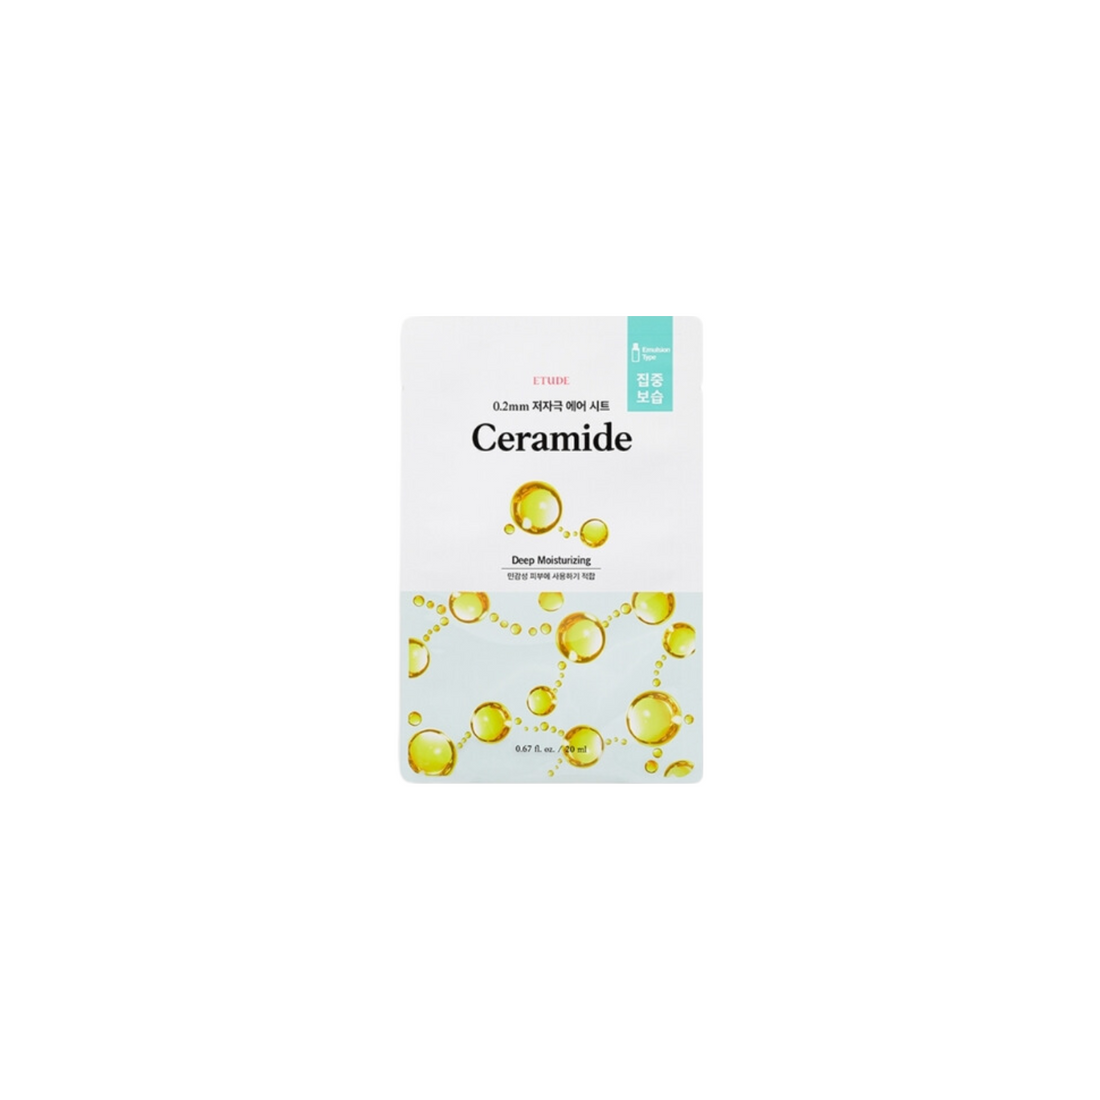 Etude 0.2 Therapy Air Mask Ceramide